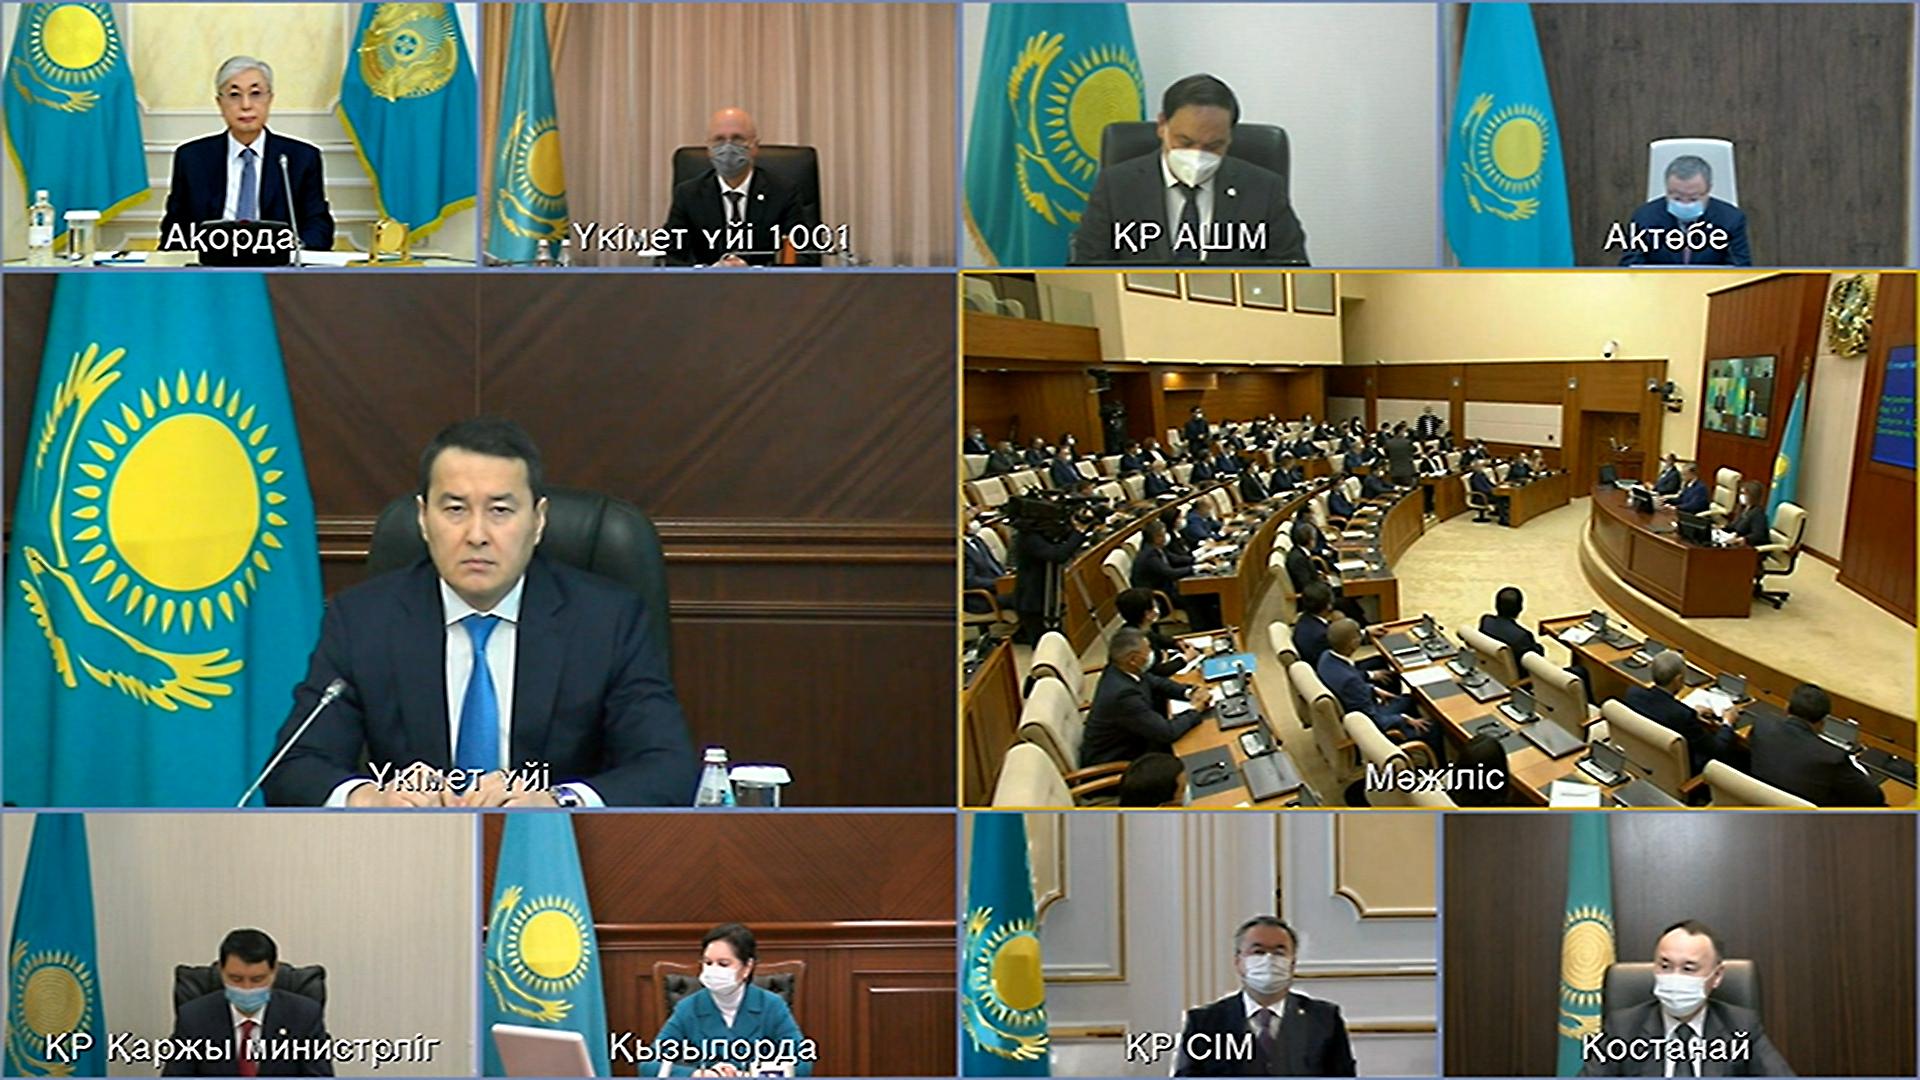 Head of State Kassym-Jomart Tokayev took part in the plenary session of the Majilis of the Parliament of the Republic of Kazakhstan